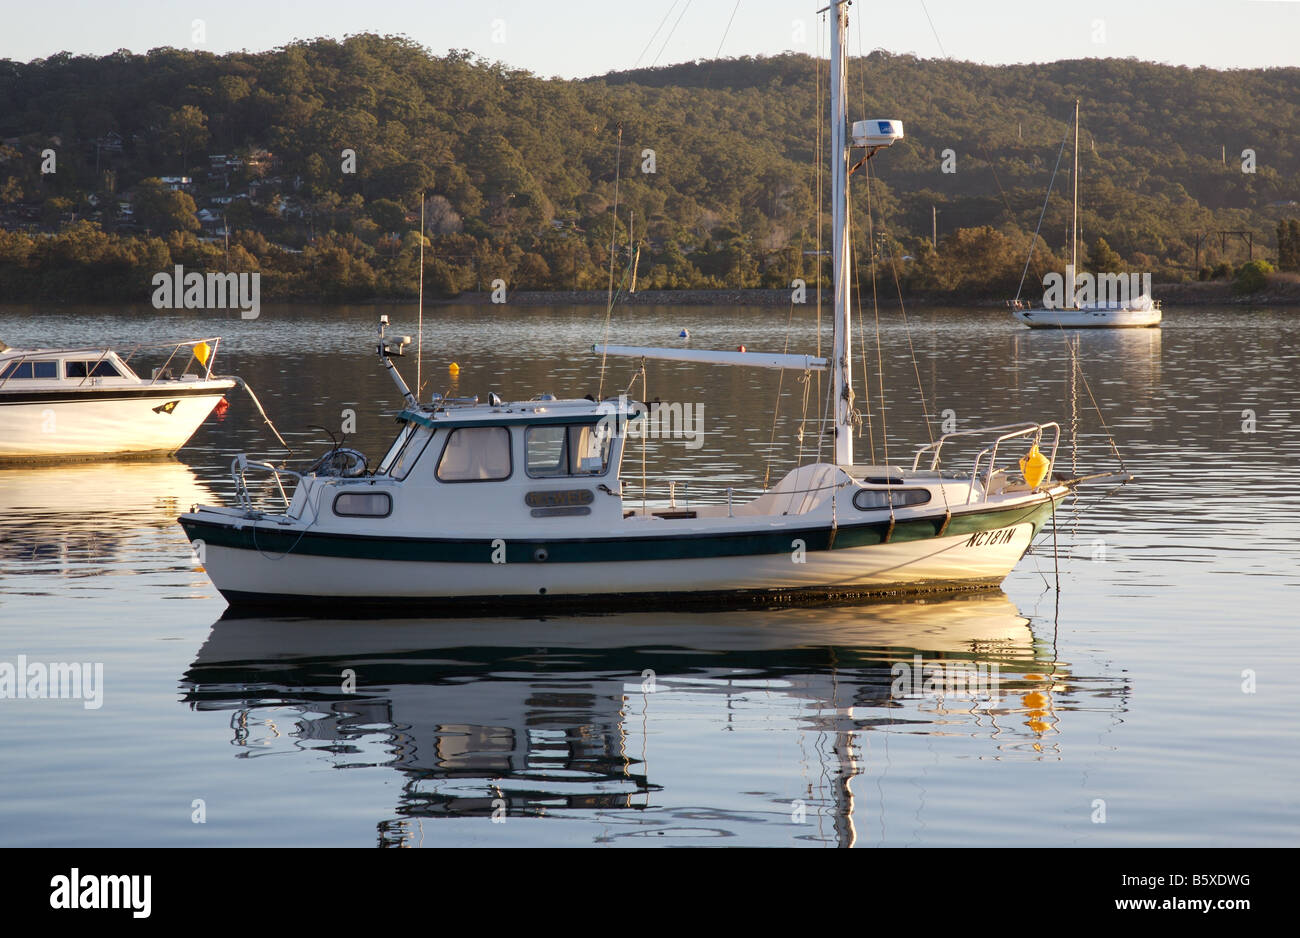 Wooden Boat moored on Brisbane Water, looking across the bay from Gosford to Tascot, NSW Australia Stock Photo